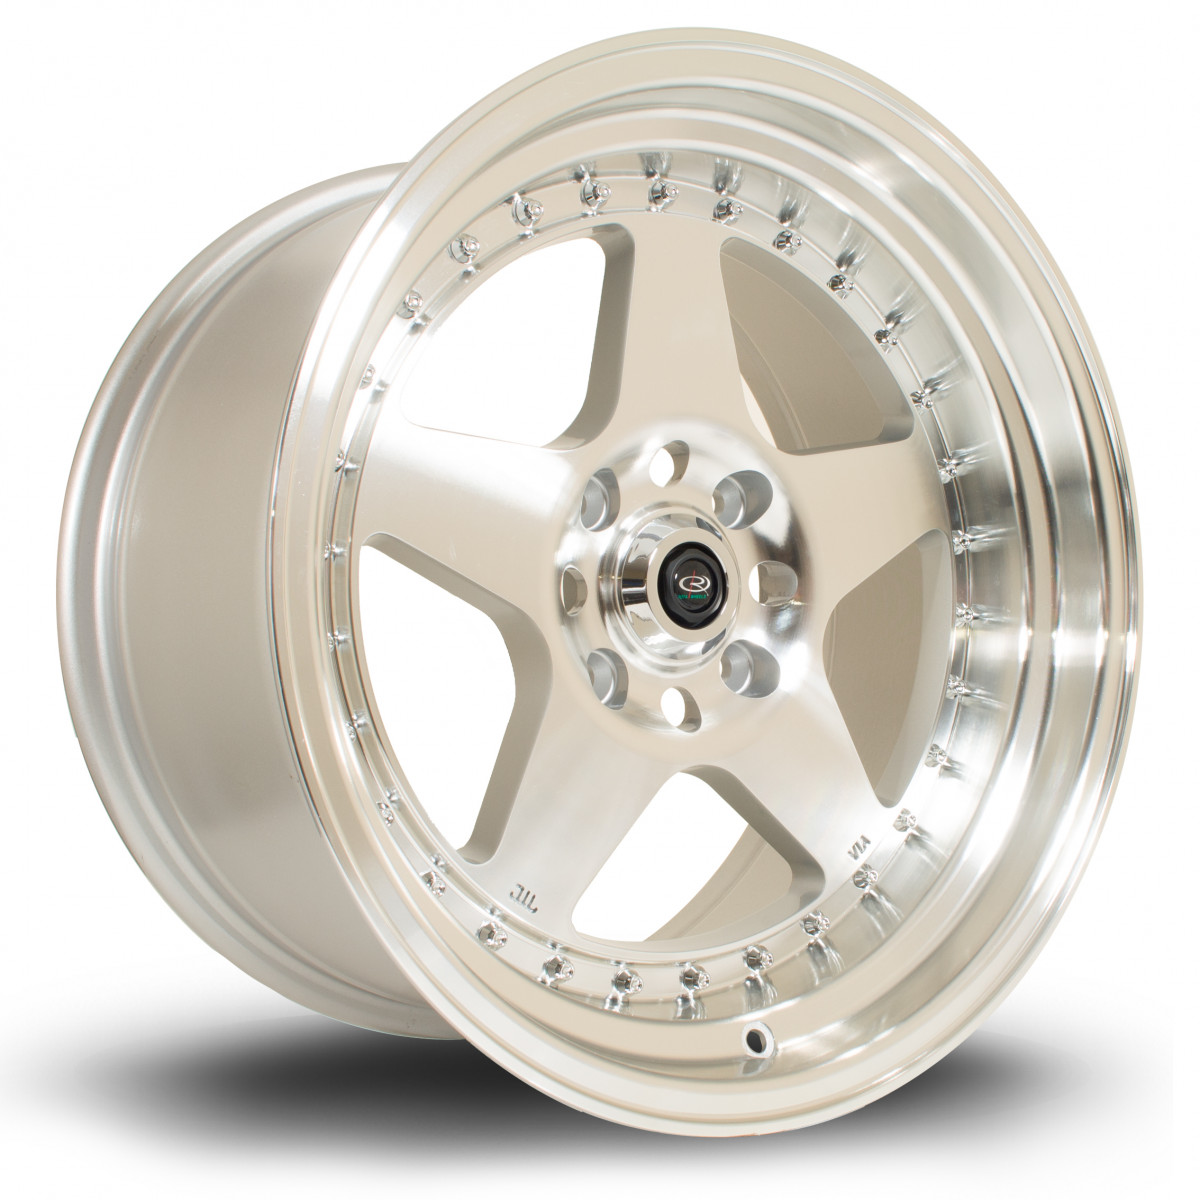 Kyusha 17x9.5 5x120 ET25 Silver with Polished Face